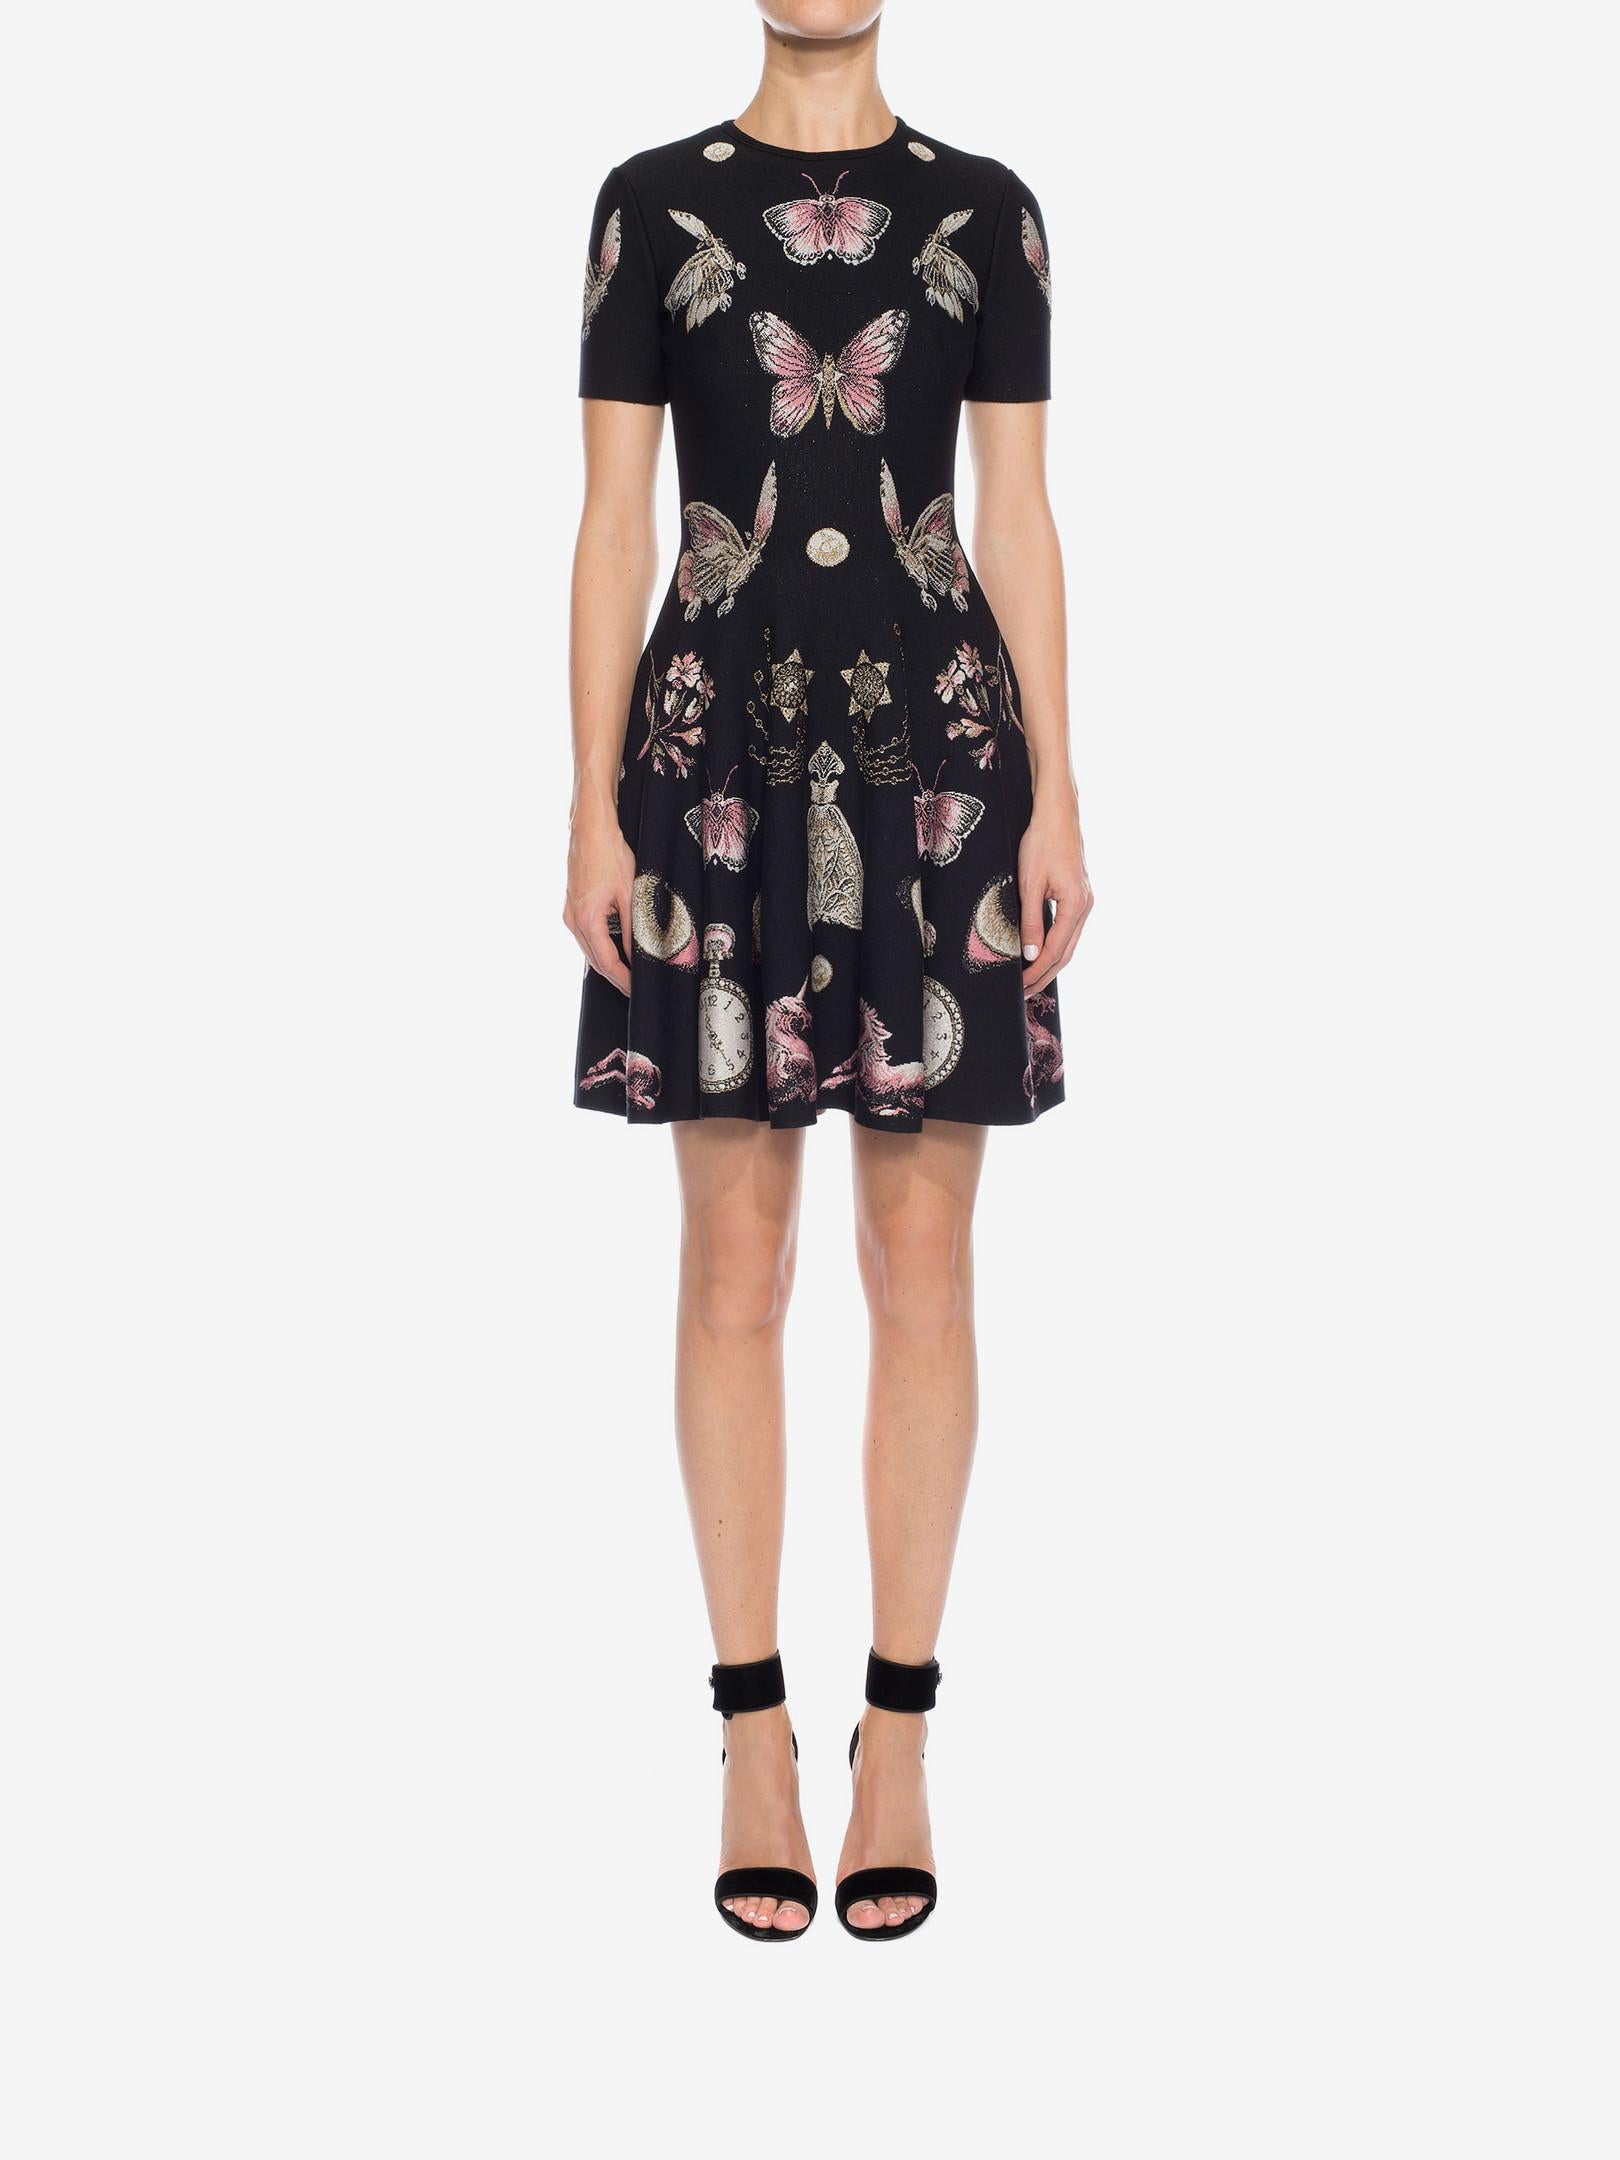 Alexander McQueen Black Butterfly Print Obsession Volume Skater Dress Sz L NWT
Features metallic sheen throughout

Made In: Italy
Color: Black, pink
Composition: 40% wool, 26% silk, 11% nylon, 10% rayon, 6% metallised fiber, 5% polyester, 2%